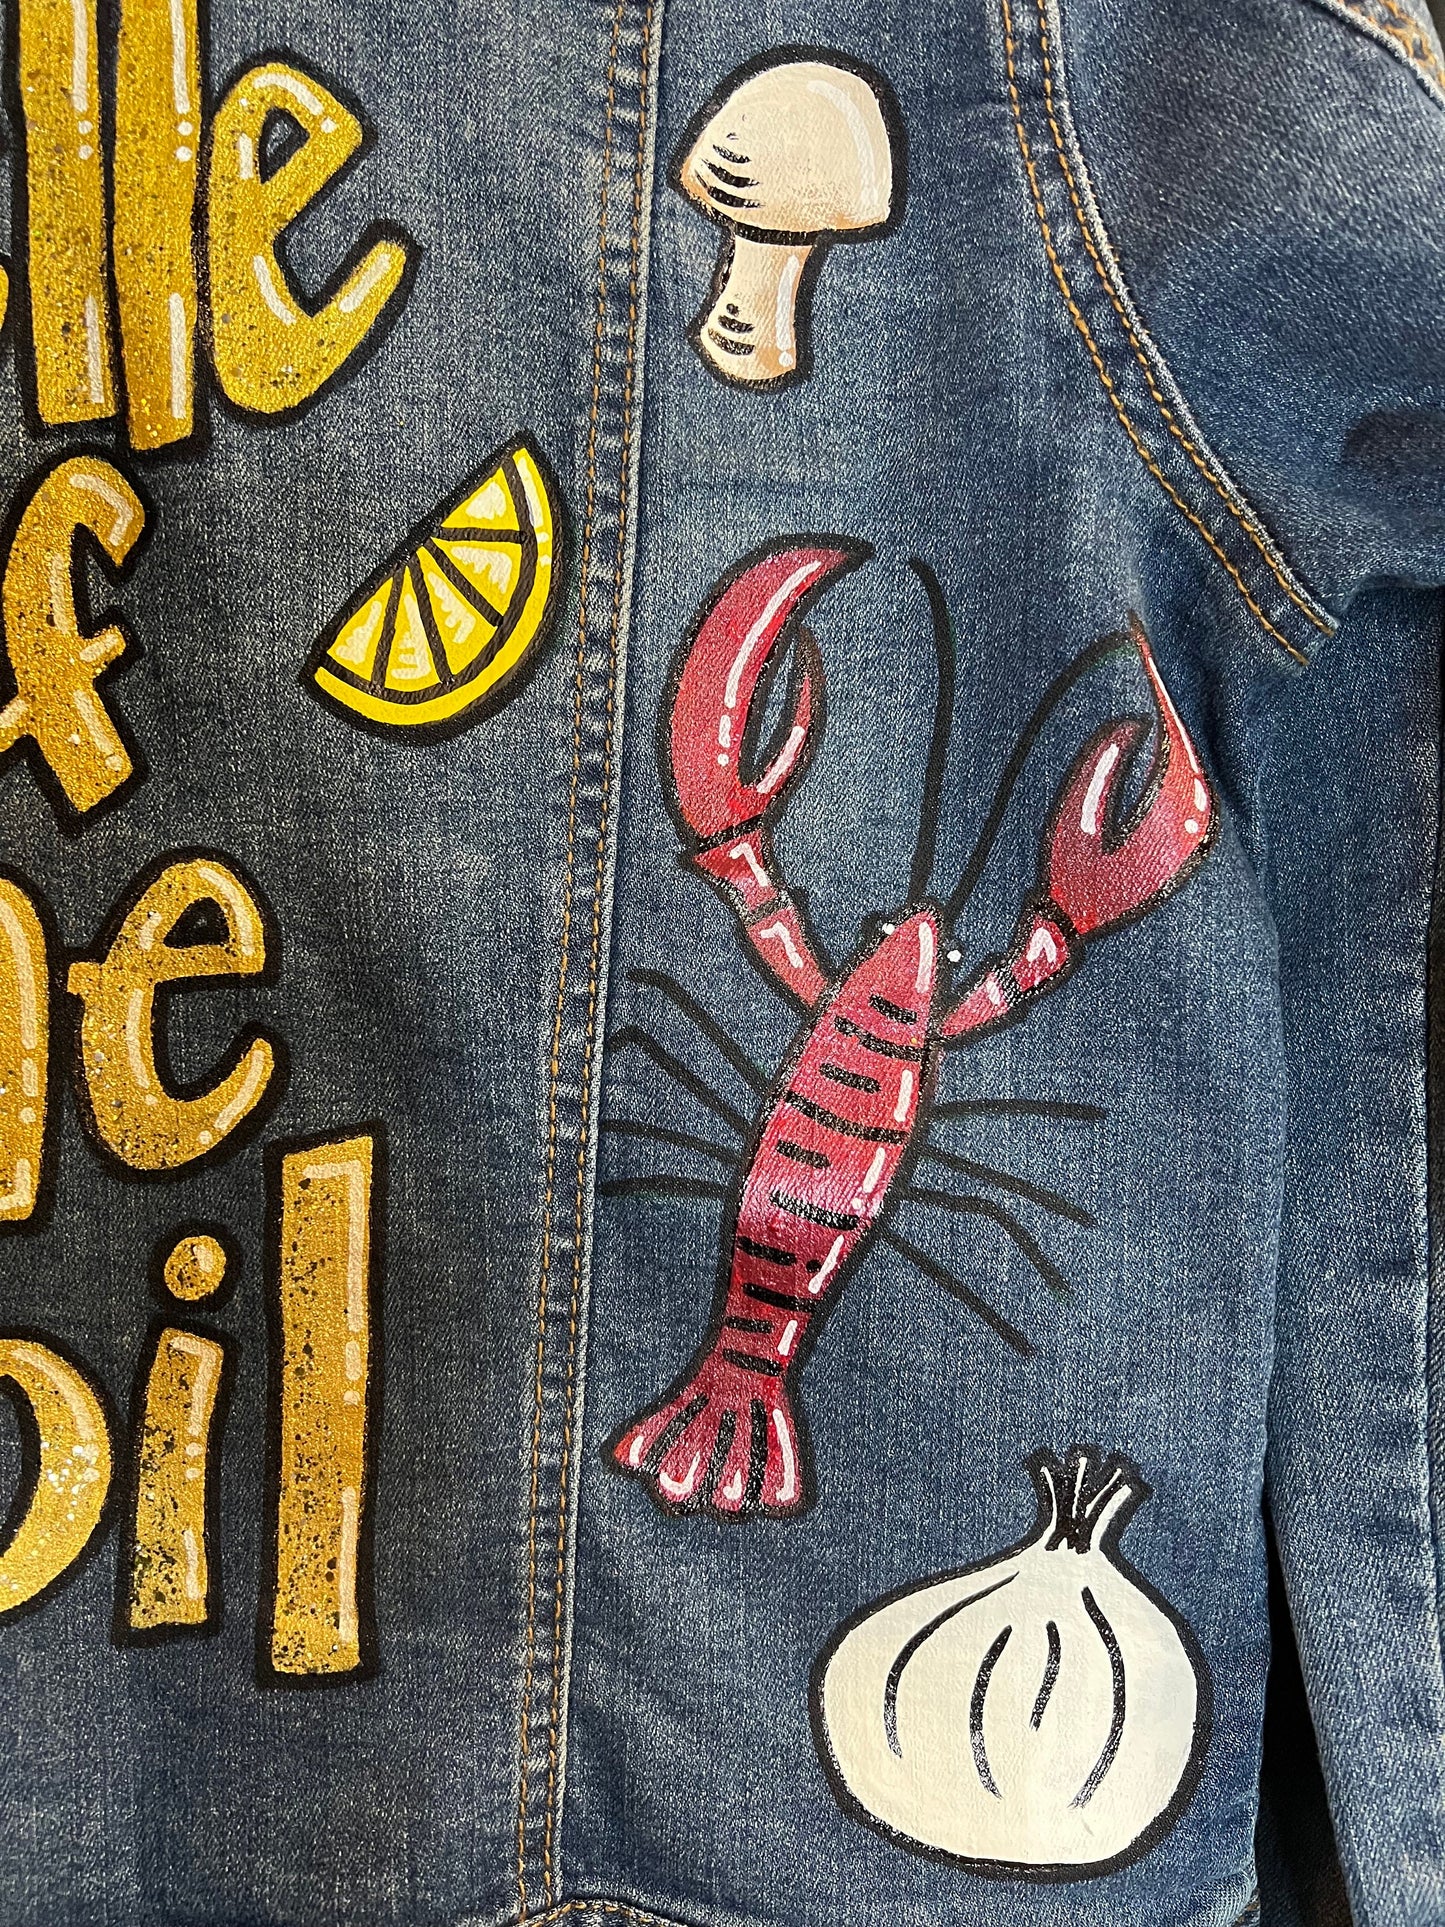 Hand Painted Mardi Gras Jean Jacket - Mardi Gras, Painted Jean Jacket, New Orleans, Crawfish Boil, Parade Outfit, Belle of the Boil, Mudbug